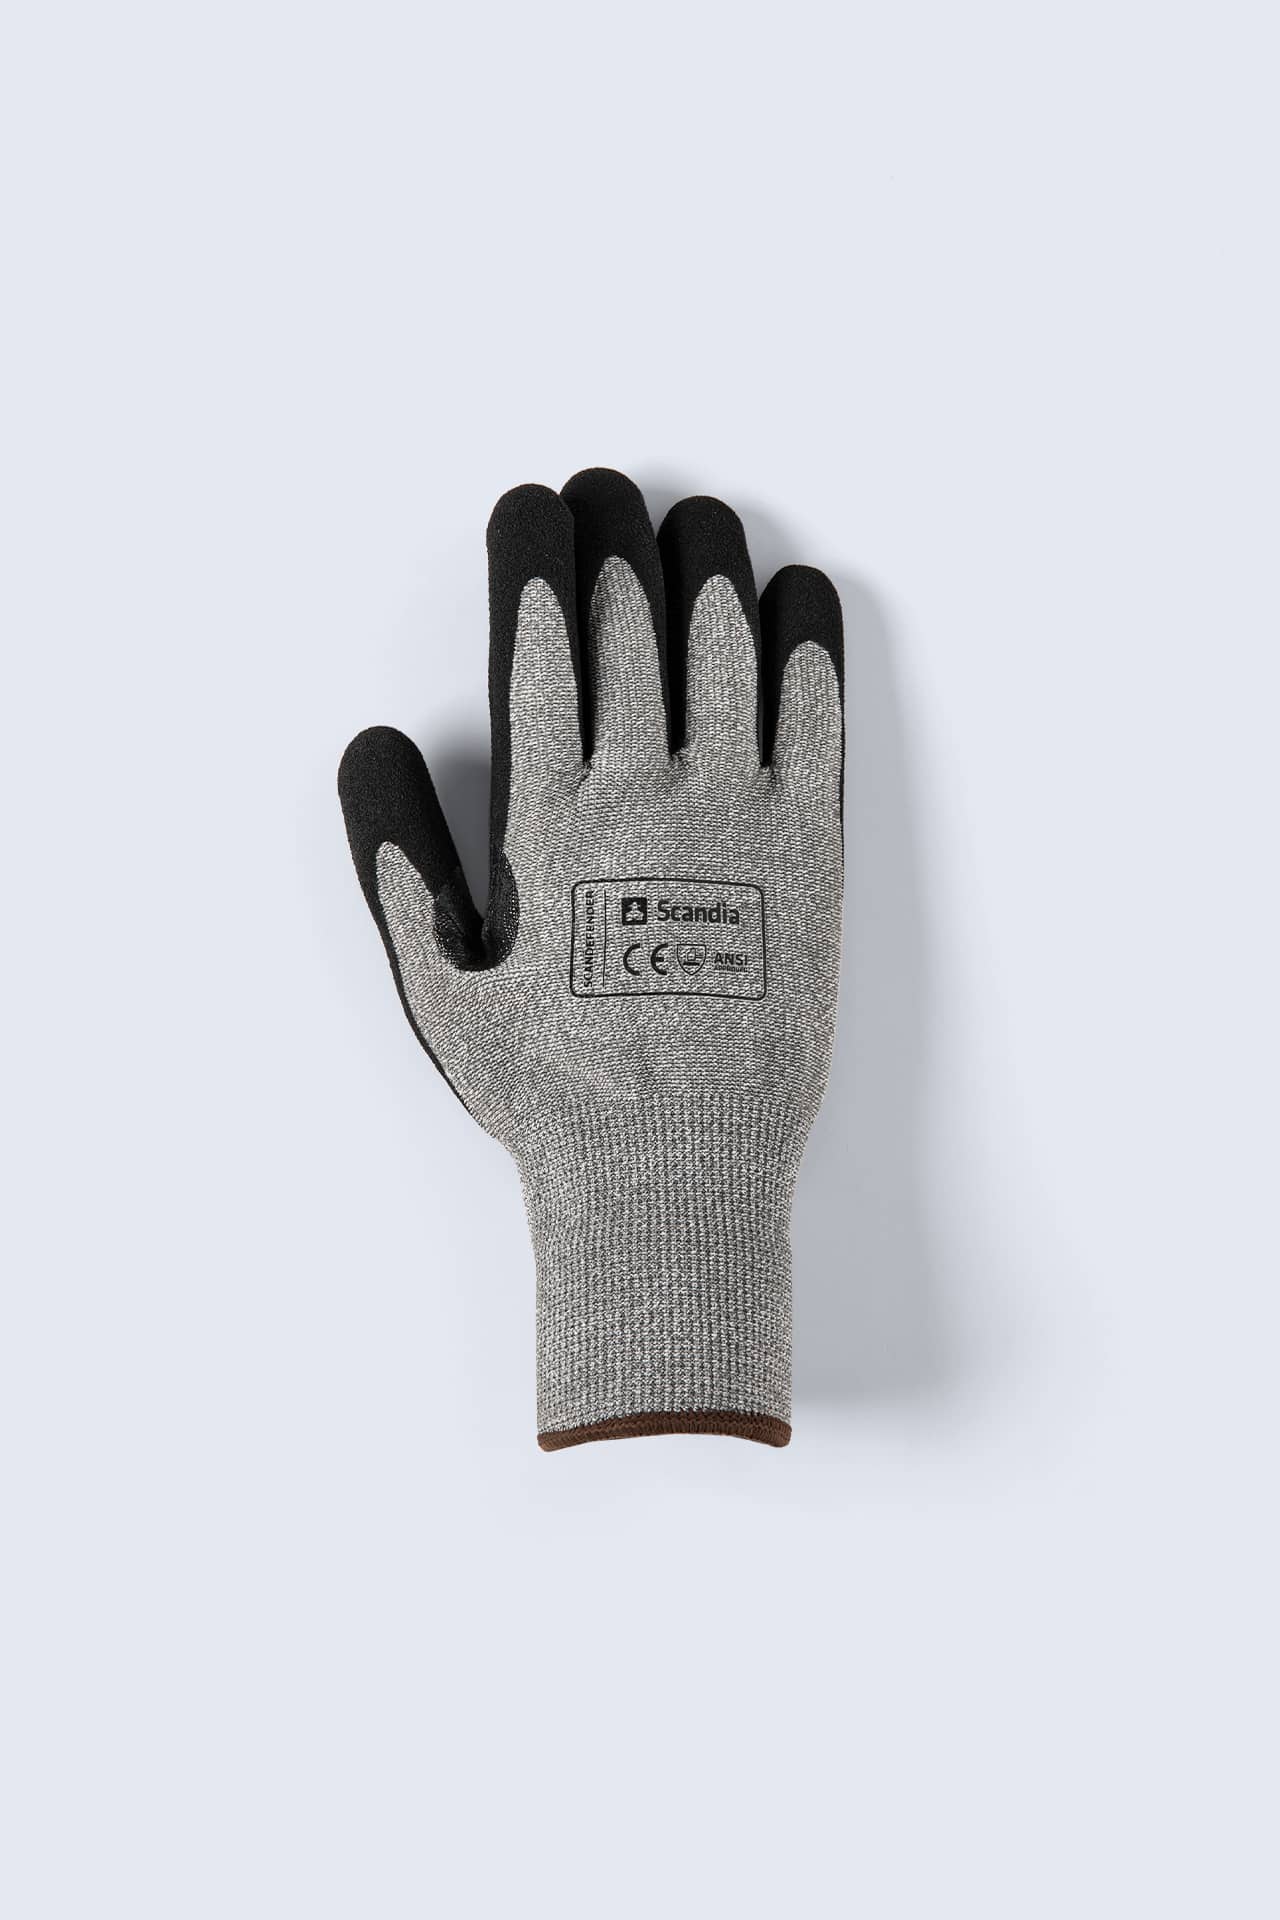 Cut Resistant Gloves, Hand Protection Gloves